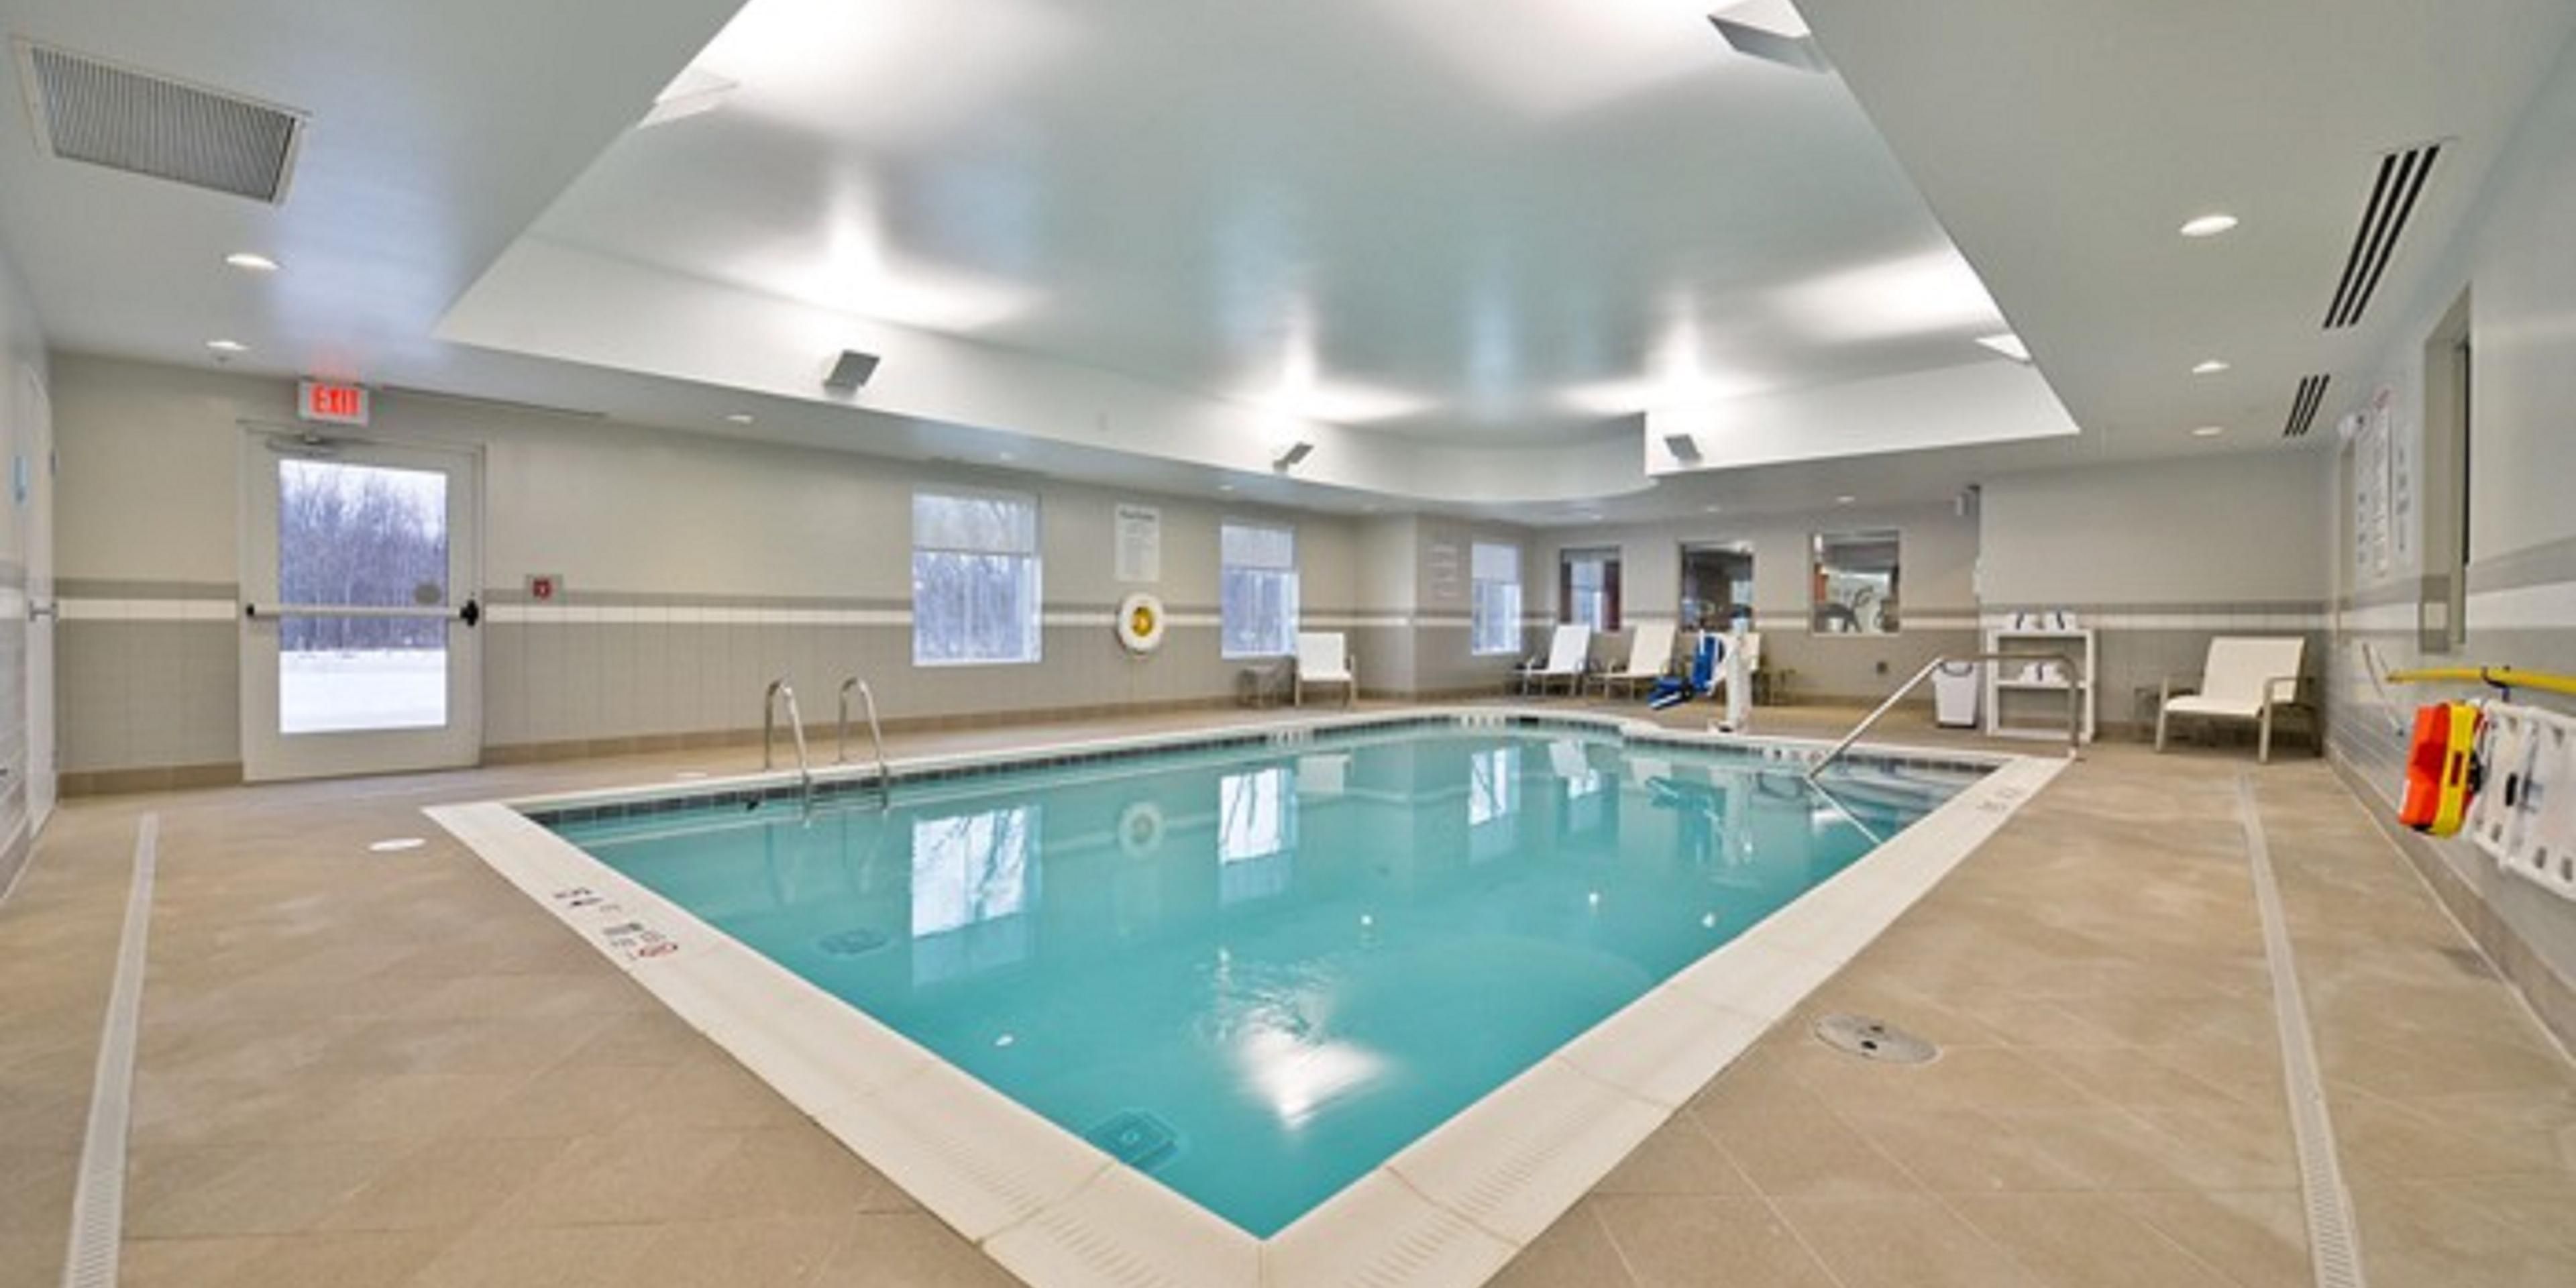 If you are looking for a getaway for your family, look no further than Holiday Inn Express Canandaigua! Our sparkling pool will keep the kids entertained while you relax on the deck. Please note: you do need to stop at the desk to reserve your space for the pool and get your towels!